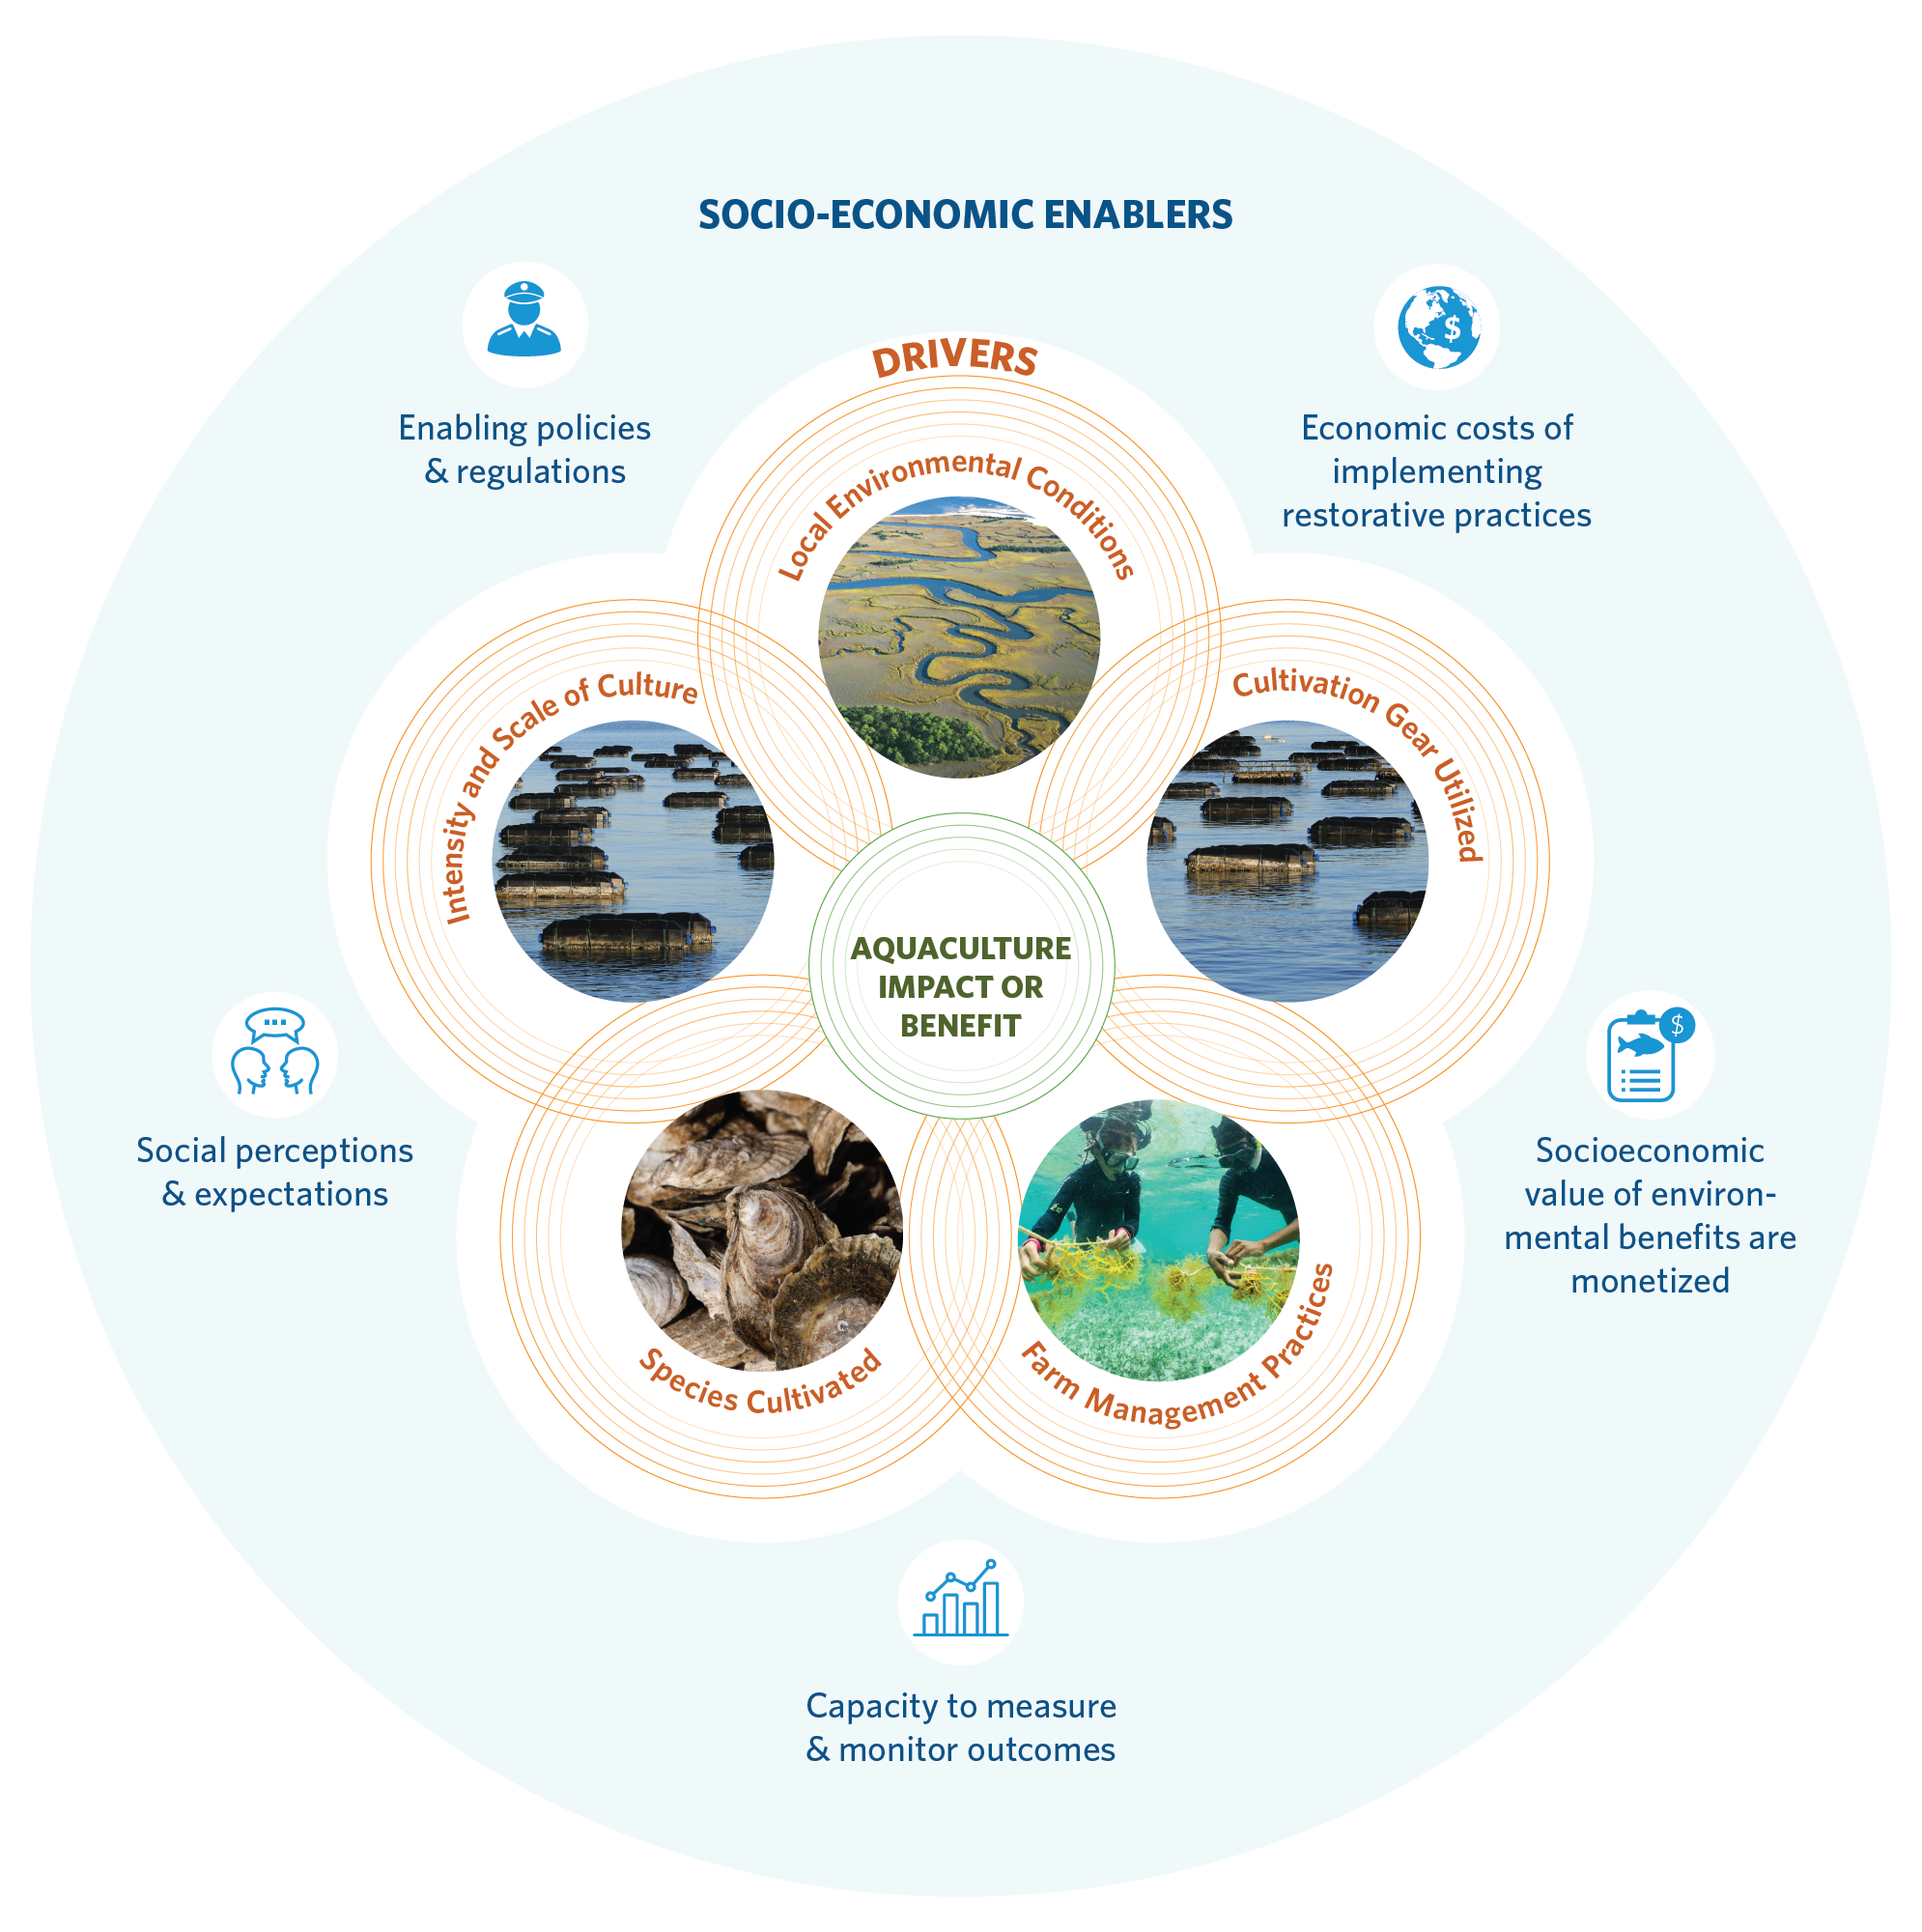 a circular graphic showing the interaction of socio-economic enablers, drivers, and aquaculture impact or benefit